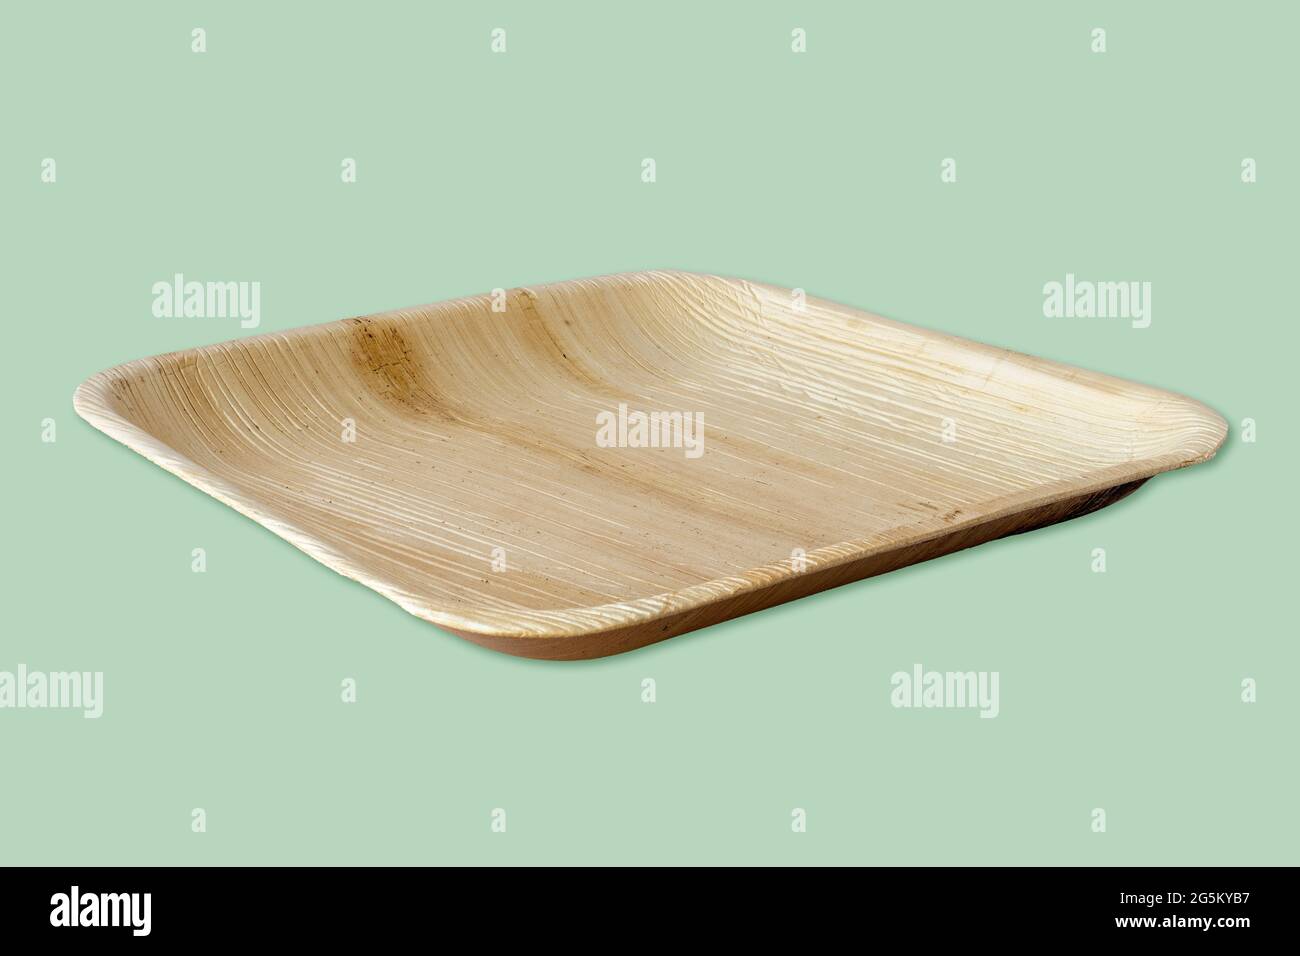 Eco-friendly and sustainable palm leaf plate, isolated on green background. Plastic free, natural disposable and biodegradable tableware. Stock Photo